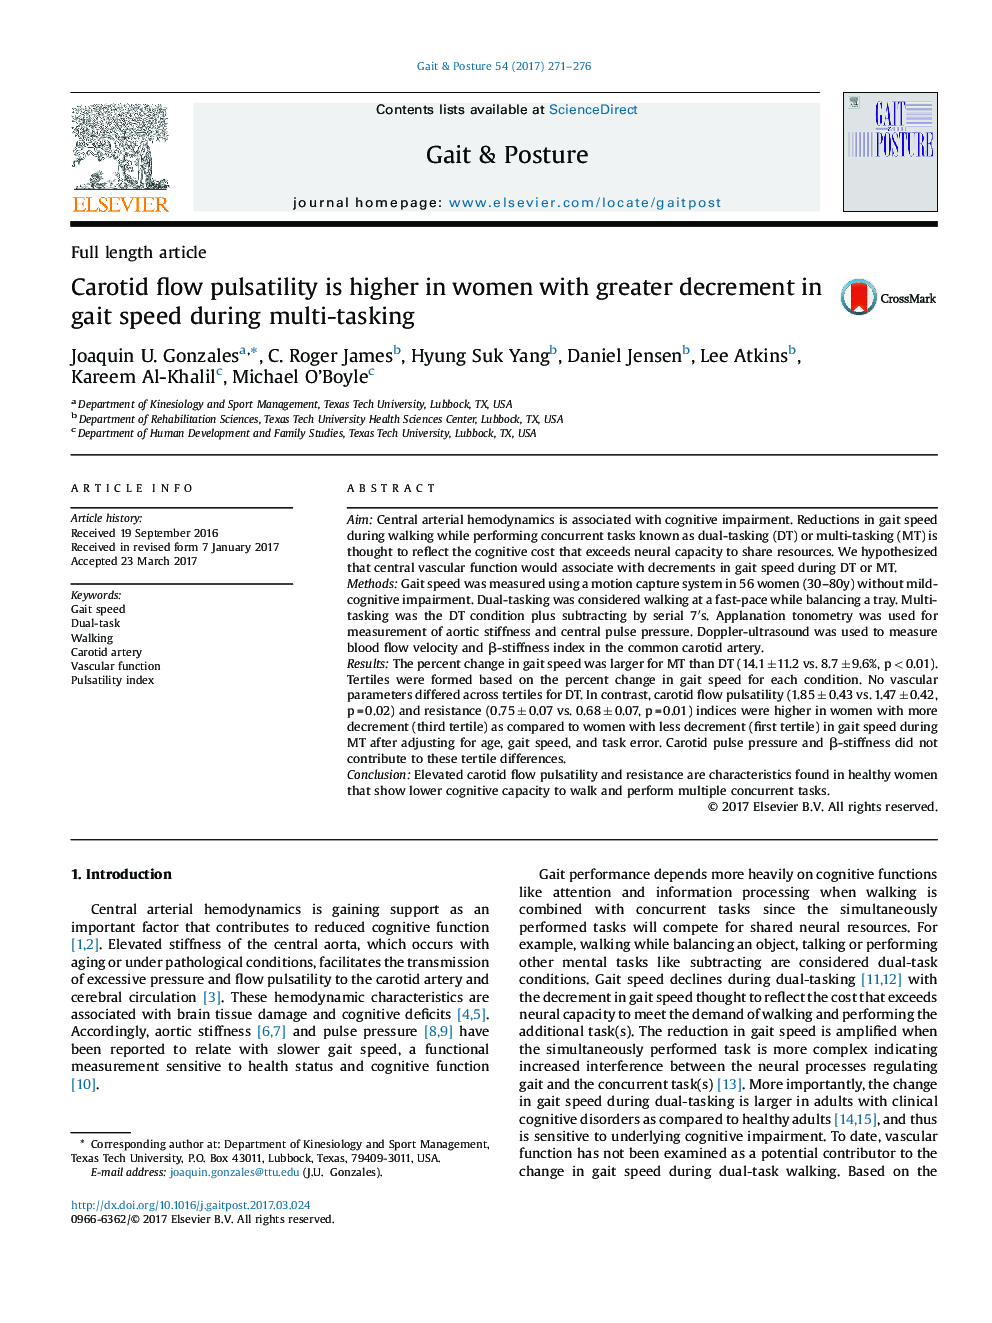 Carotid flow pulsatility is higher in women with greater decrement in gait speed during multi-tasking